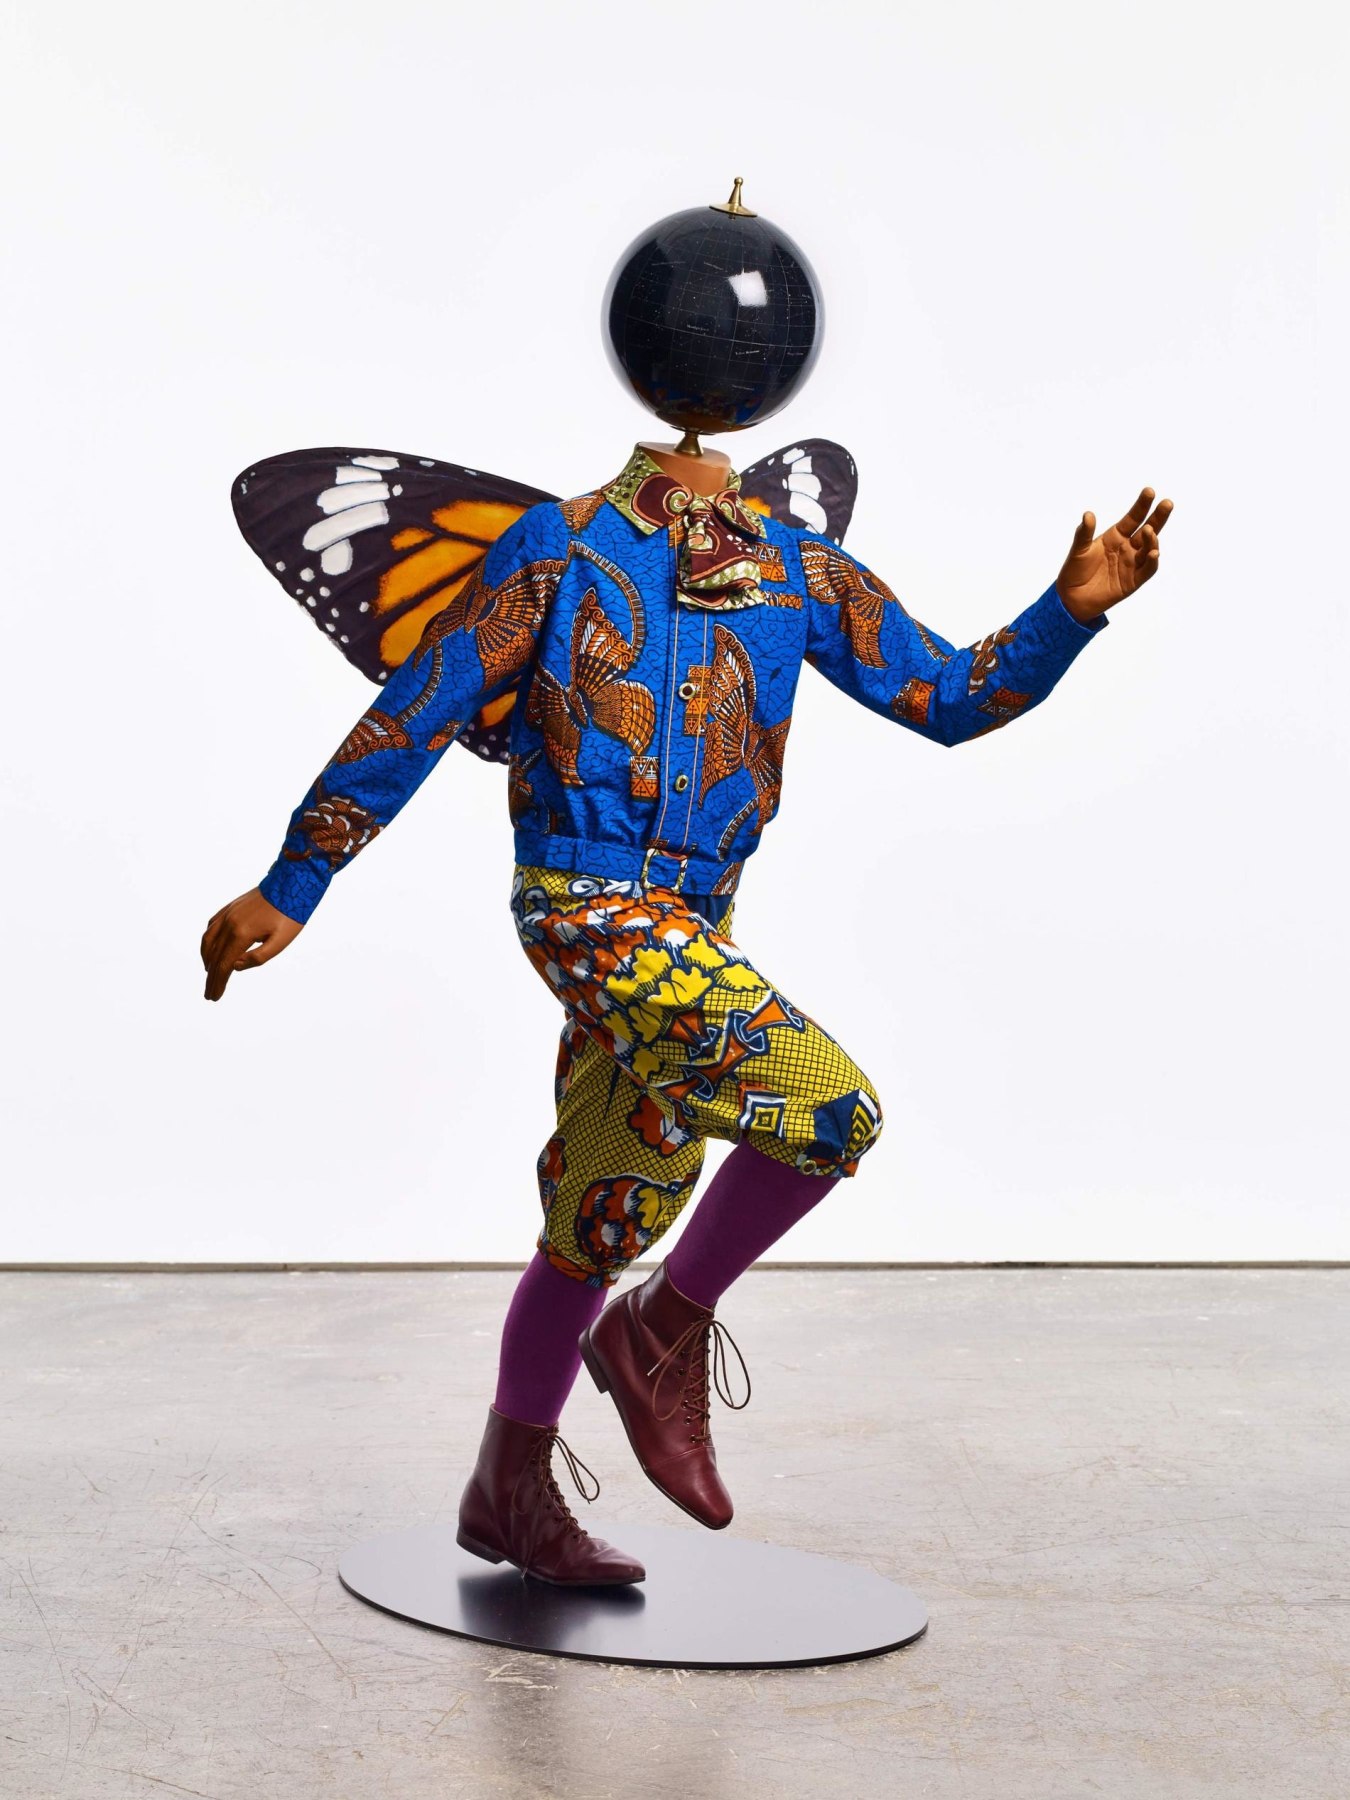 mannequin with a globe for a head and butterfly wings skipping